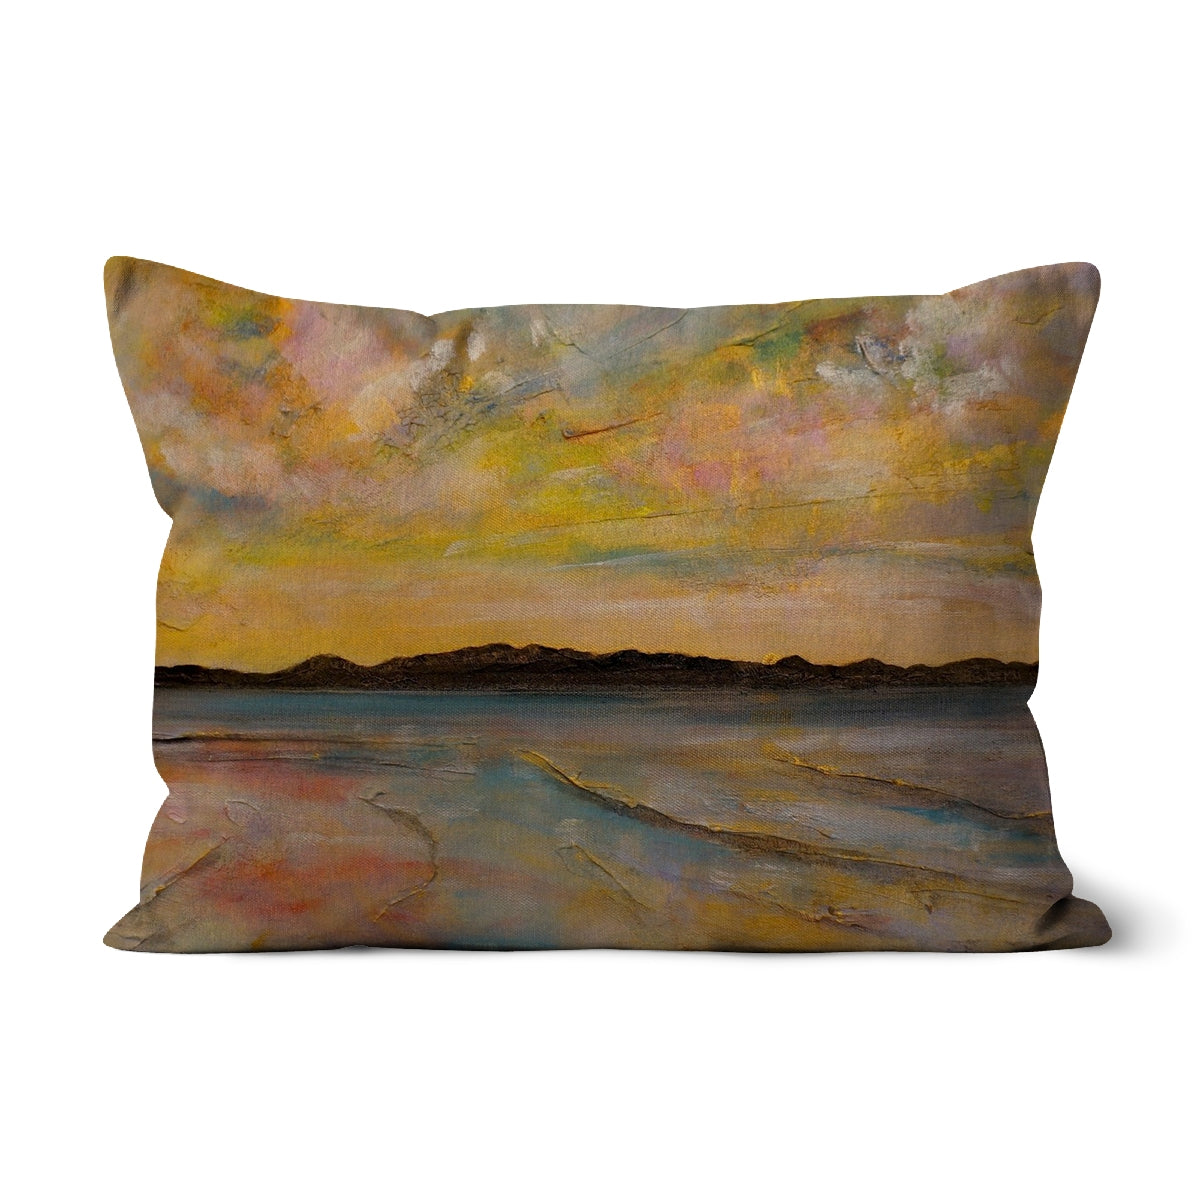 Vallay Island North Uist Art Gifts Cushion-Cushions-Hebridean Islands Art Gallery-Faux Suede-19"x13"-Paintings, Prints, Homeware, Art Gifts From Scotland By Scottish Artist Kevin Hunter